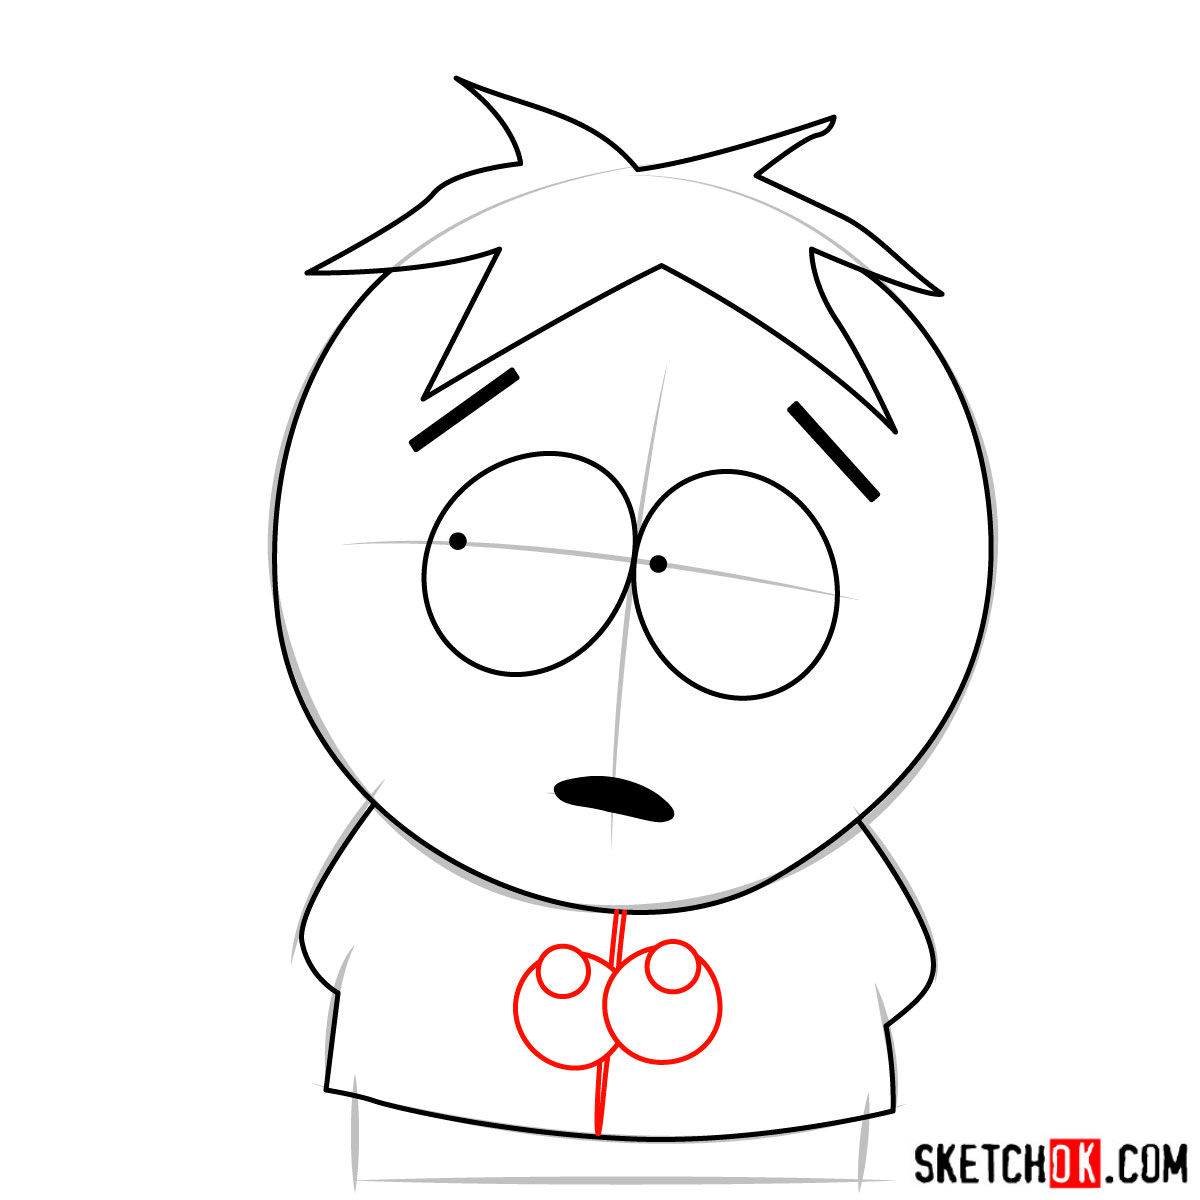 How to draw Butters Stotch - step 05